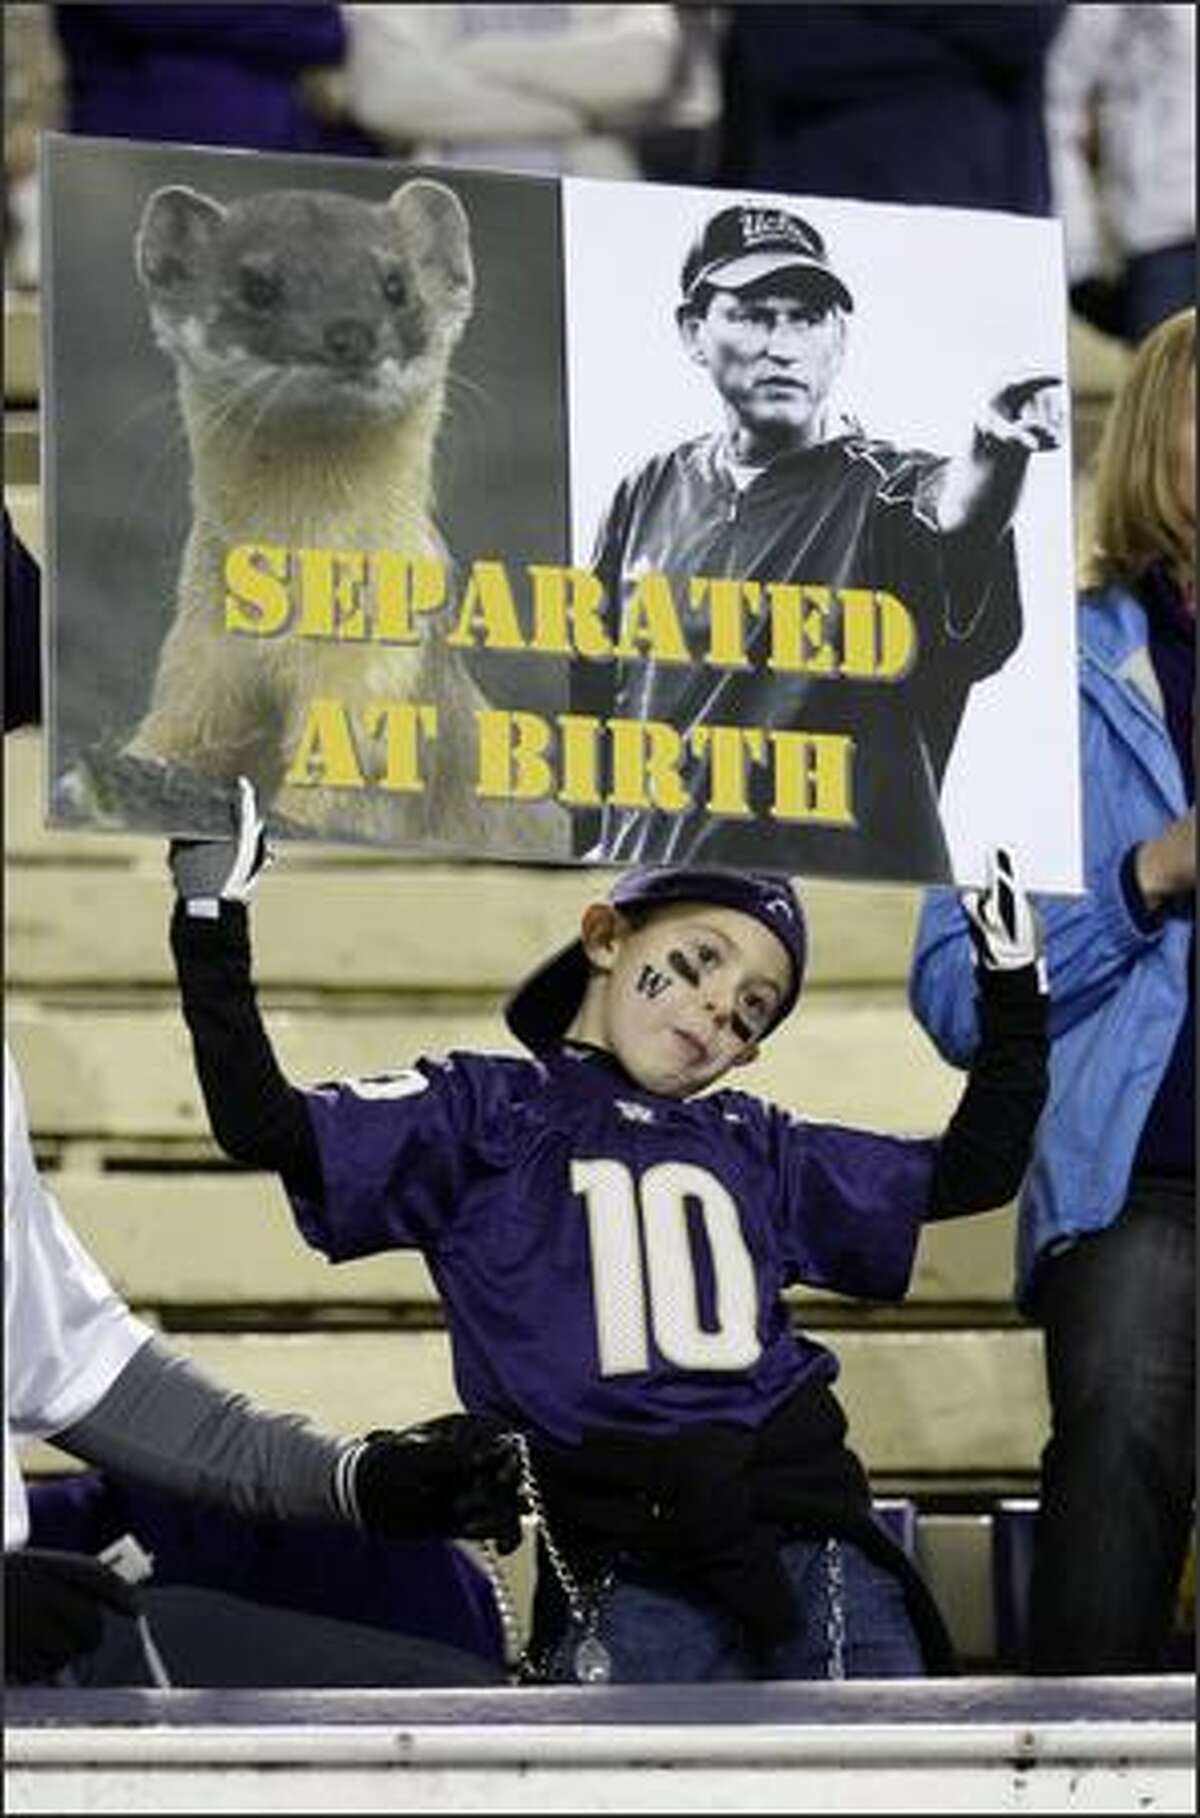 A Washington fan displays his distaste for UCLA head coach and former Washington coach Rick Neuheisel prior to the start of the game at Husky Stadium in Seattle on Saturday.